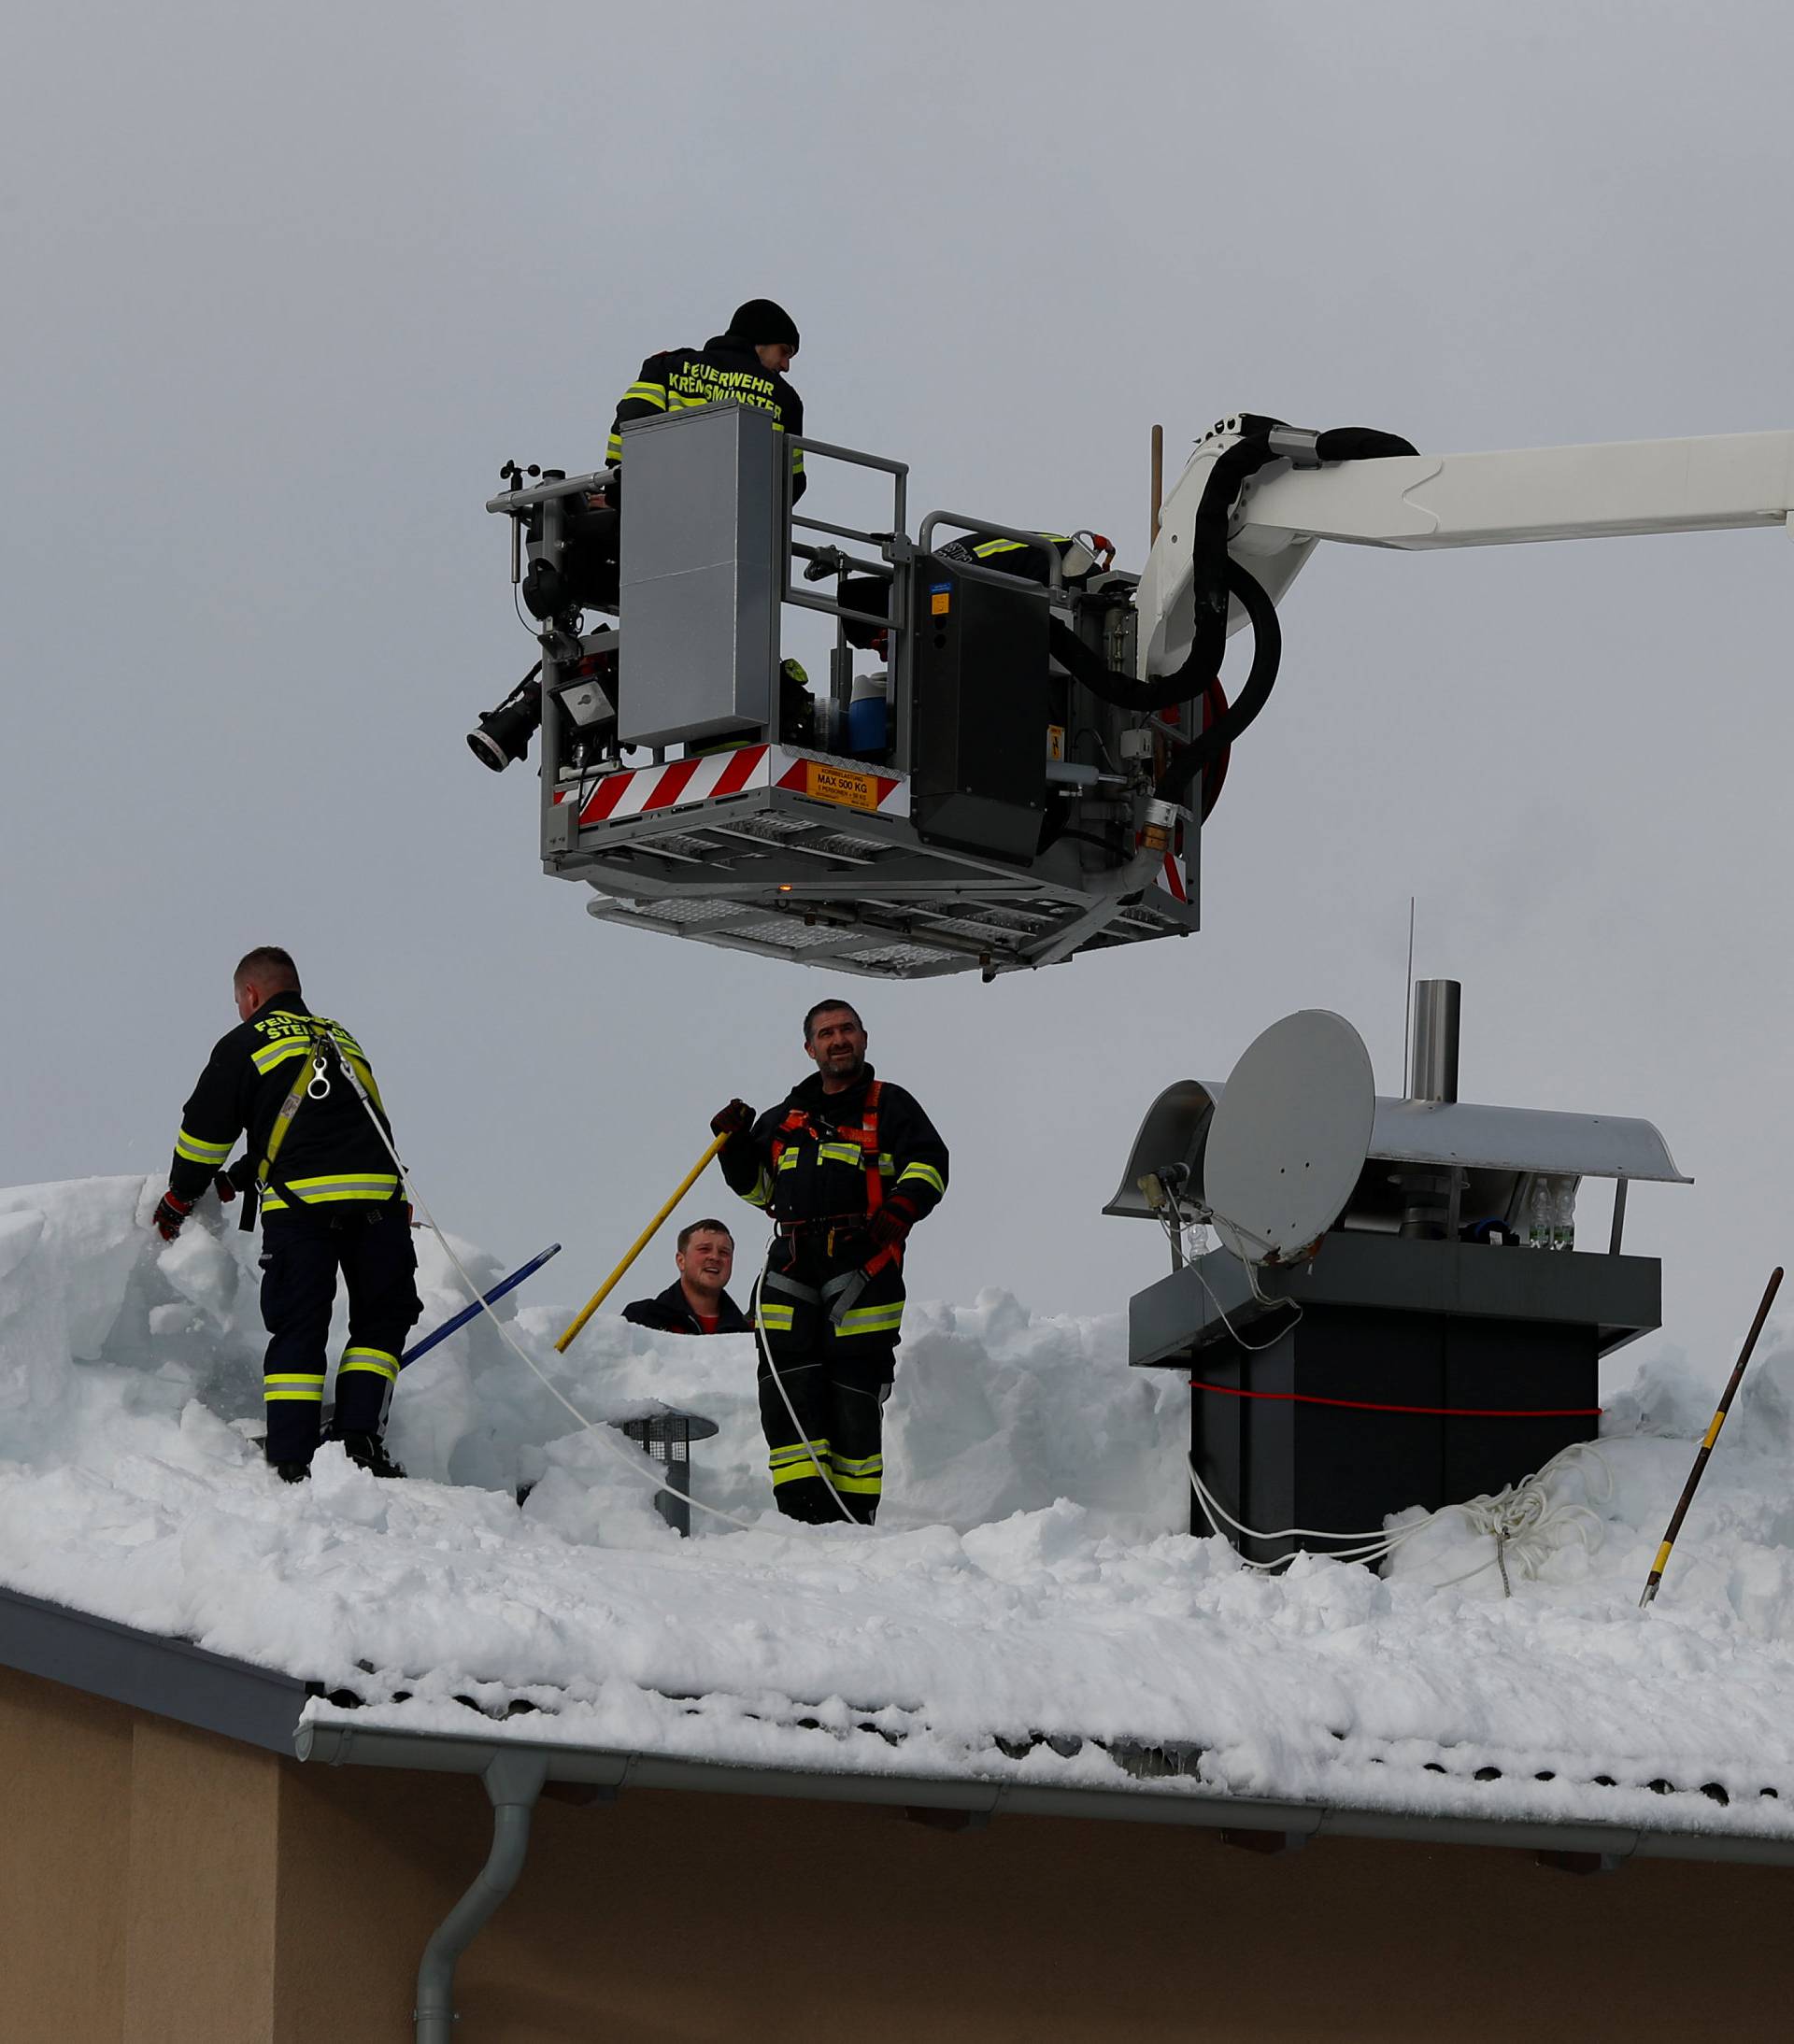 Members of the fire brigade shovel snow on a rooftop after heavy snowfall in Rosenau